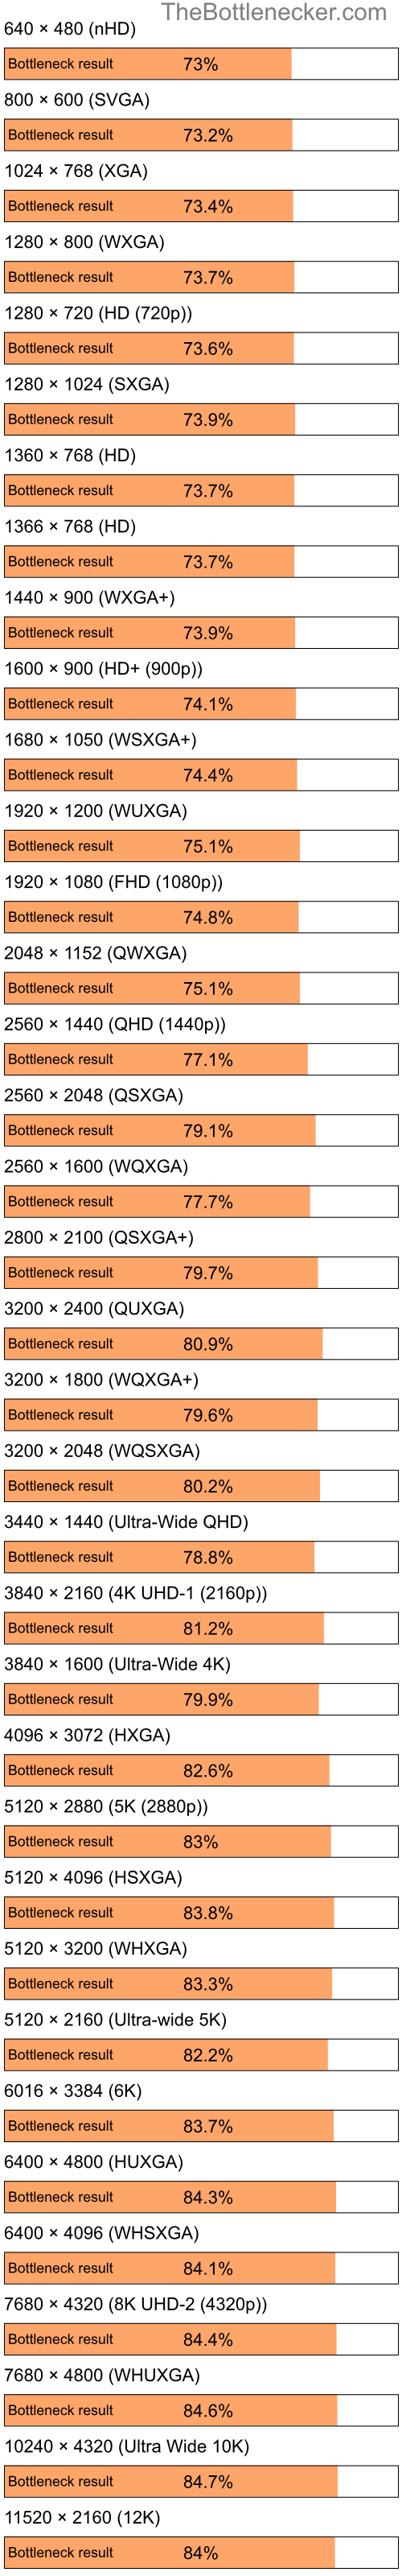 Bottleneck results by resolution for Intel Celeron and NVIDIA GeForce Go 7400 in Graphic Card Intense Tasks